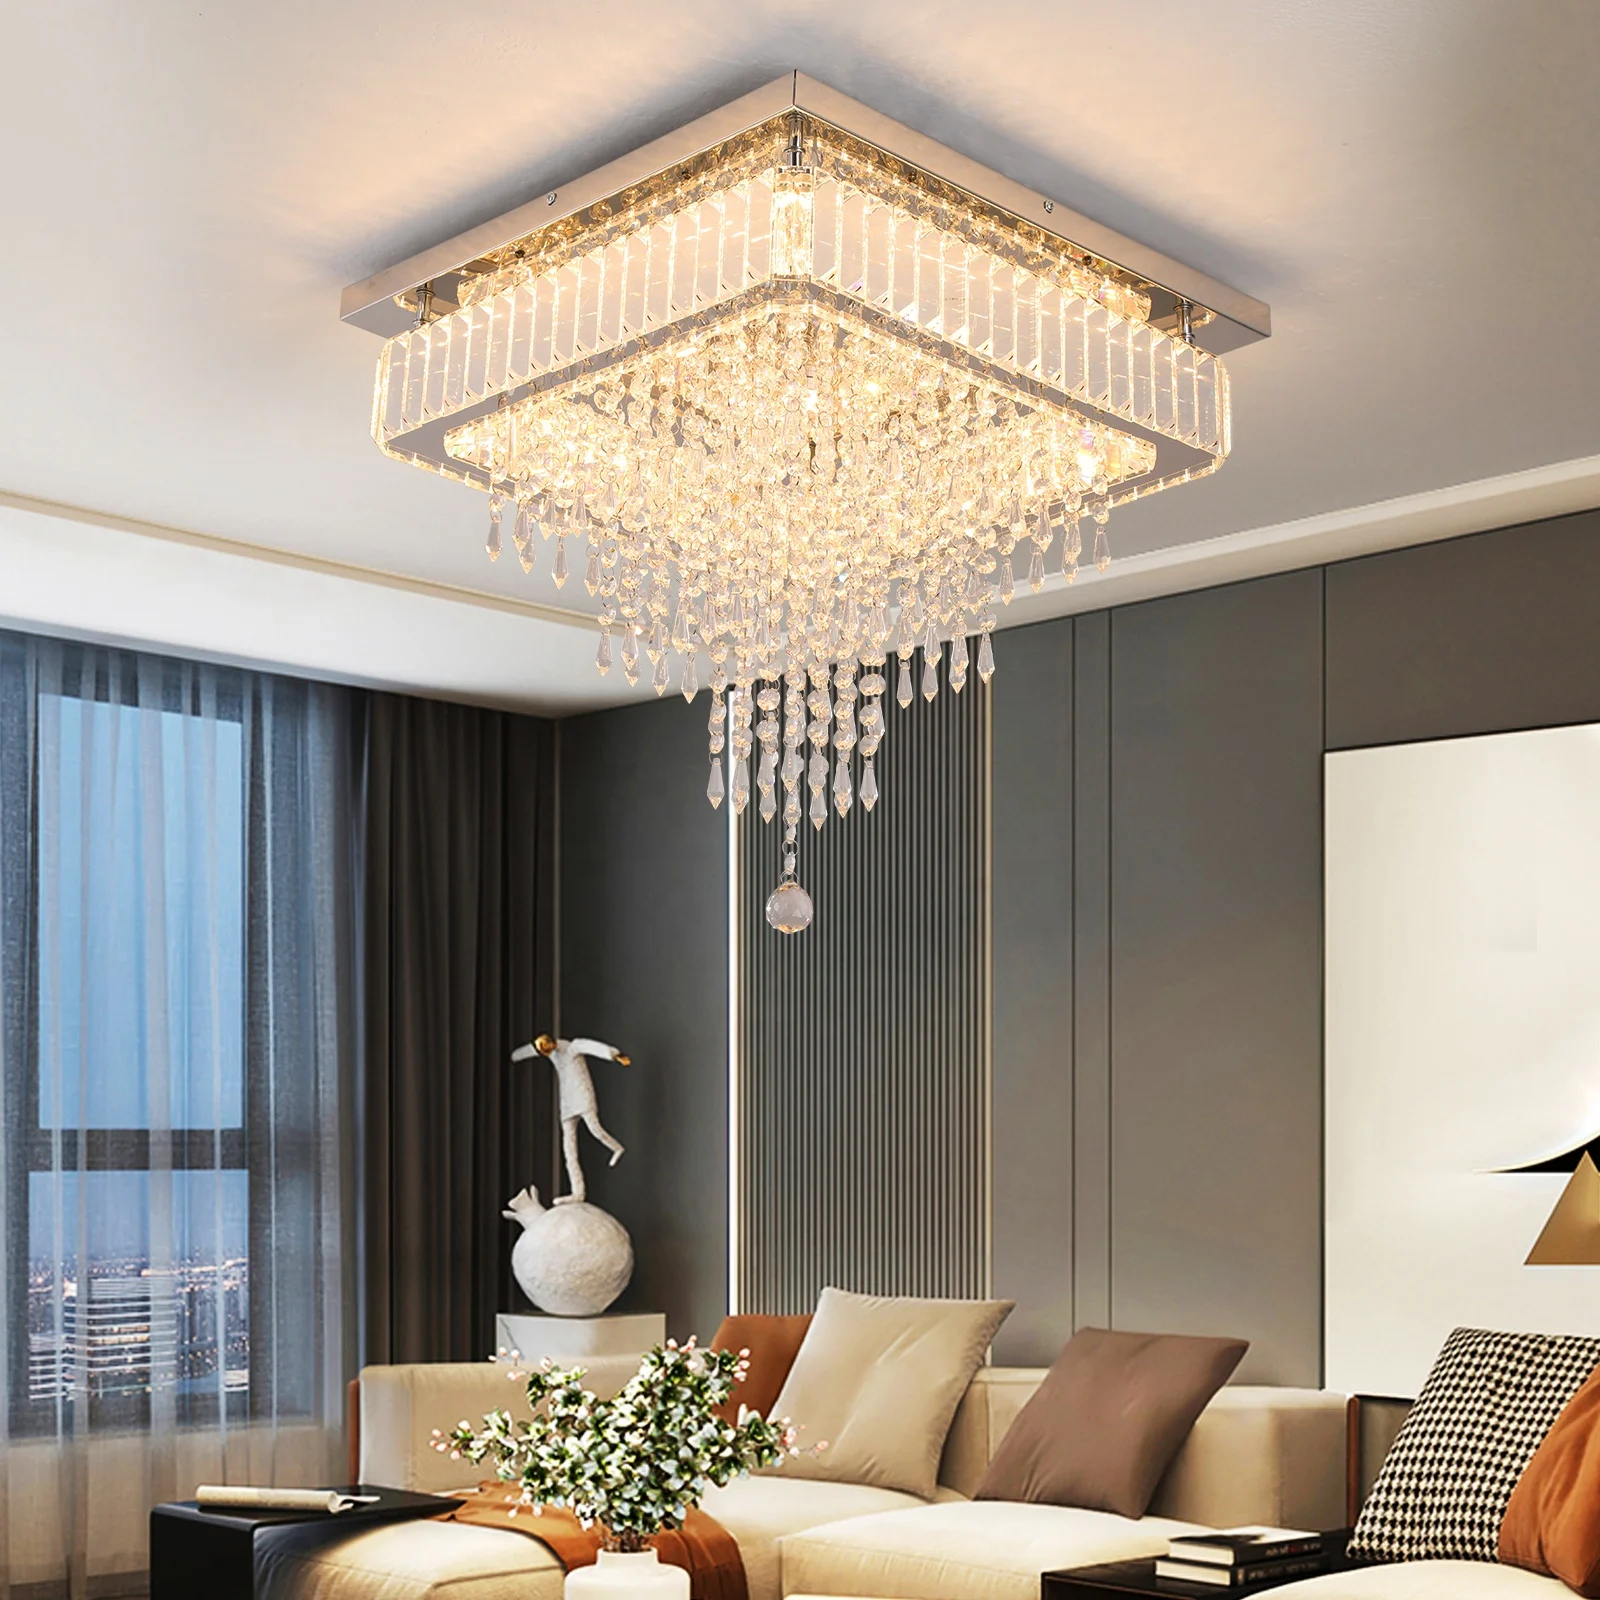 

Europe UK Dropship Free Shipping 70W LED Water Drop Ceiling Light Fixture Modern For Living Room